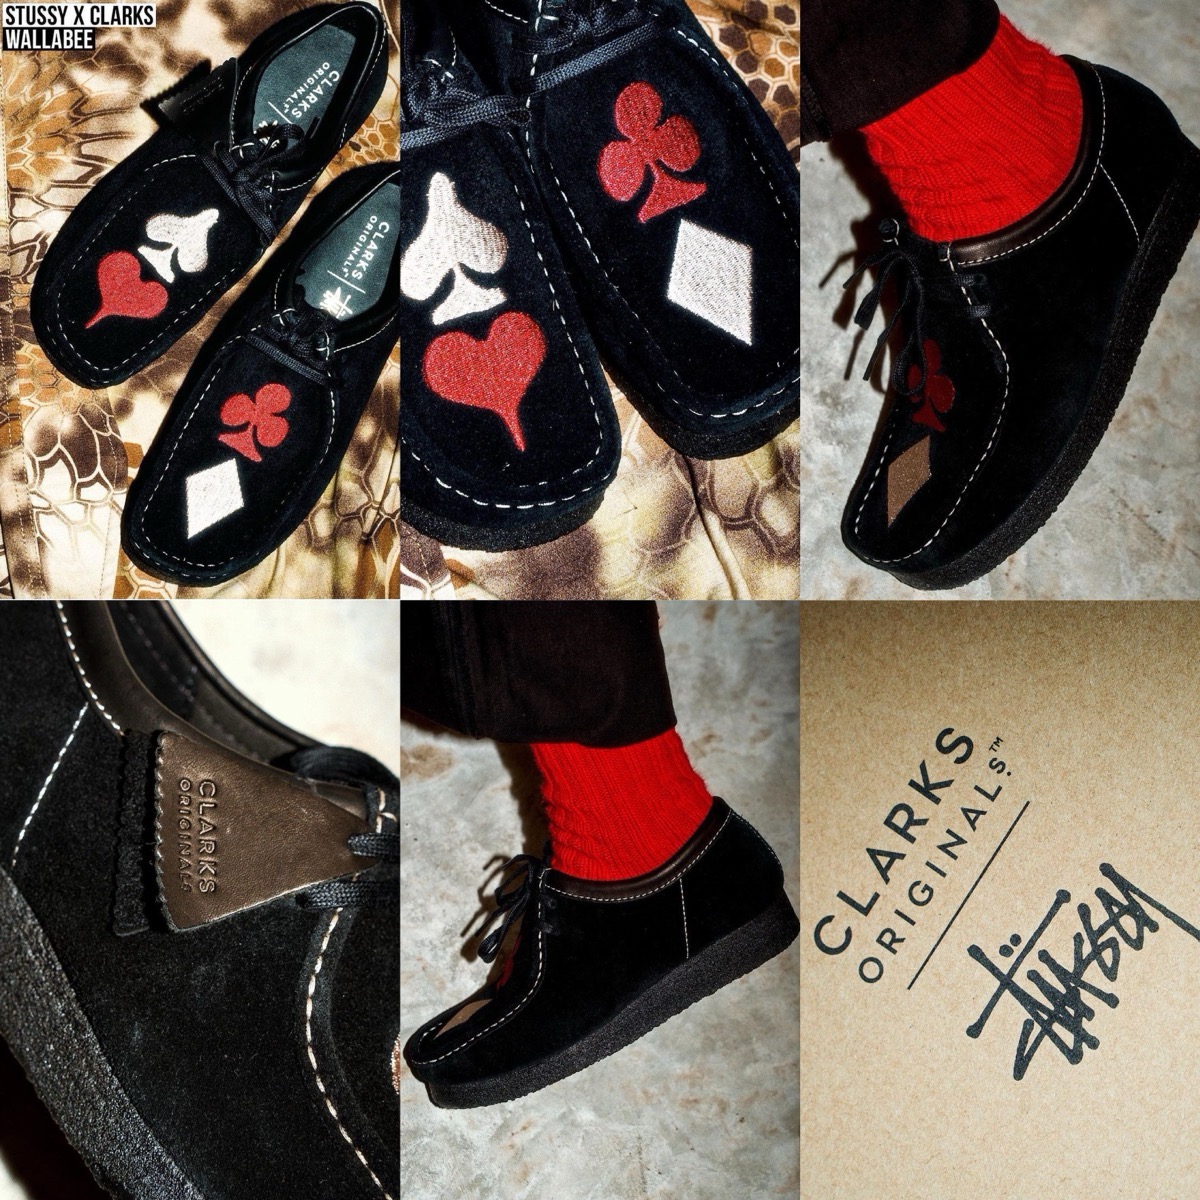 Stüssy × Clarks 『Wallabee』が国内9月29日より発売予定 | UP TO DATE